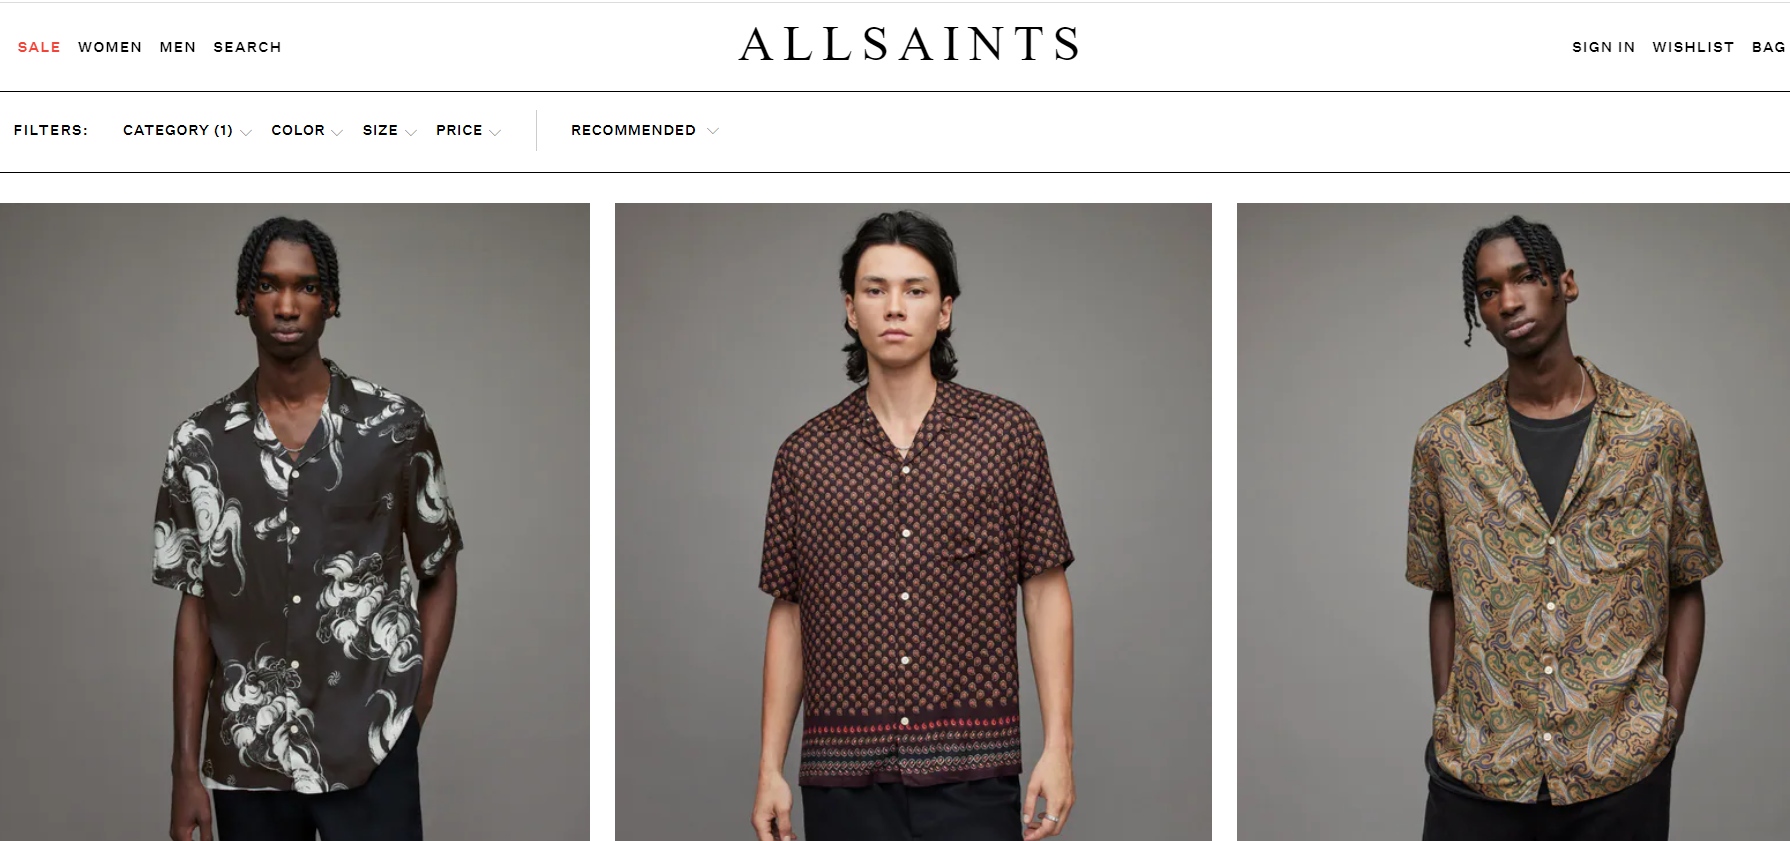 Use your Allsaints voucher code to save on men's fashion